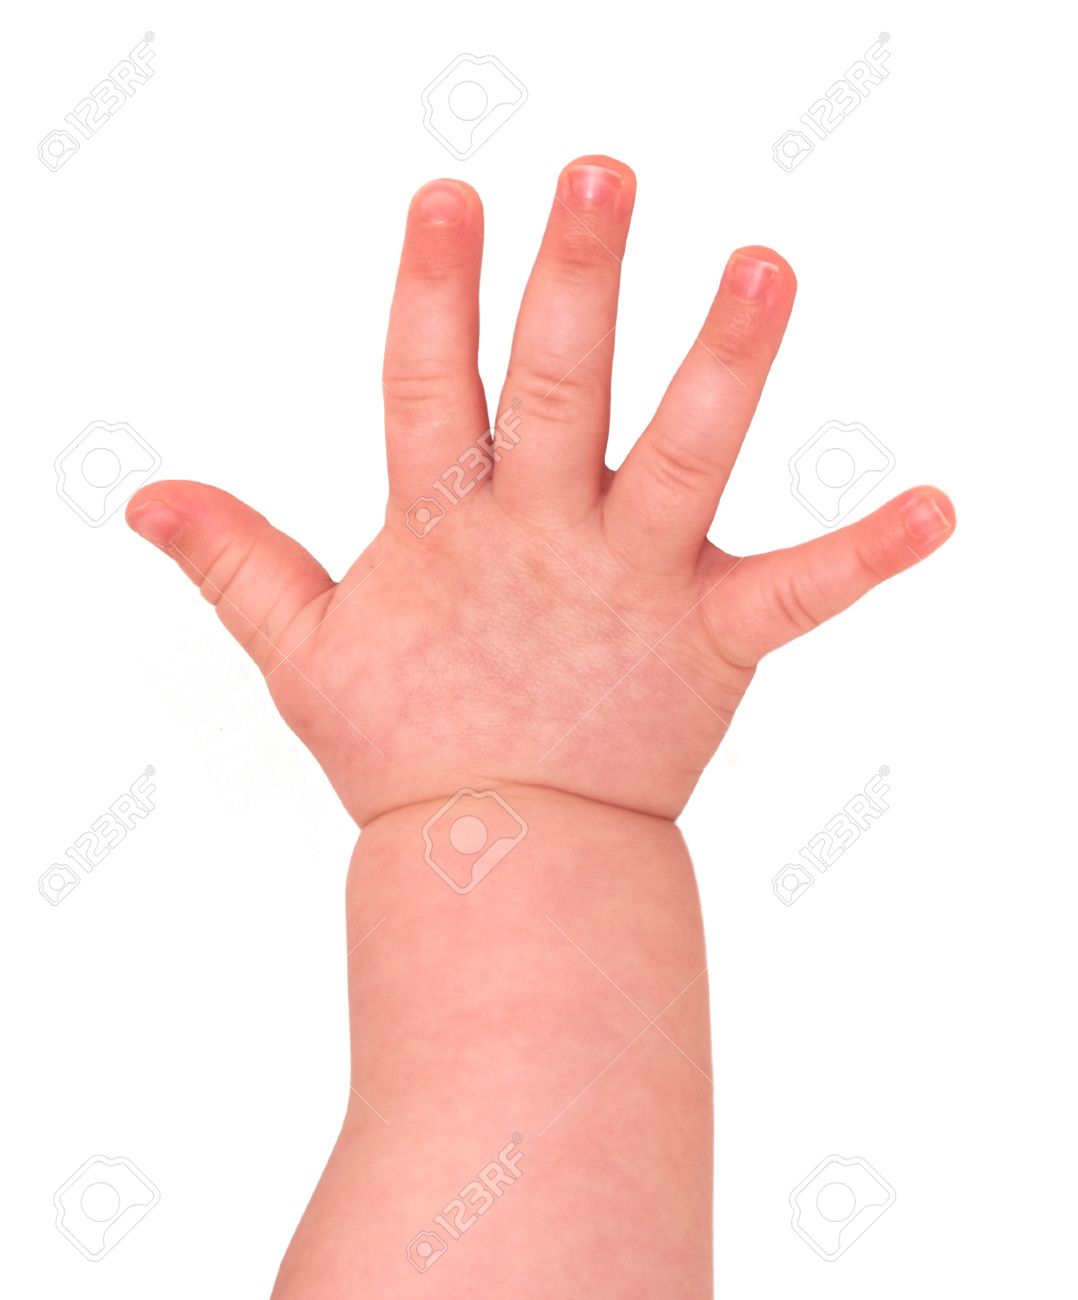 14765222-closeup-of-baby-hand-isolated-on-white.jpg